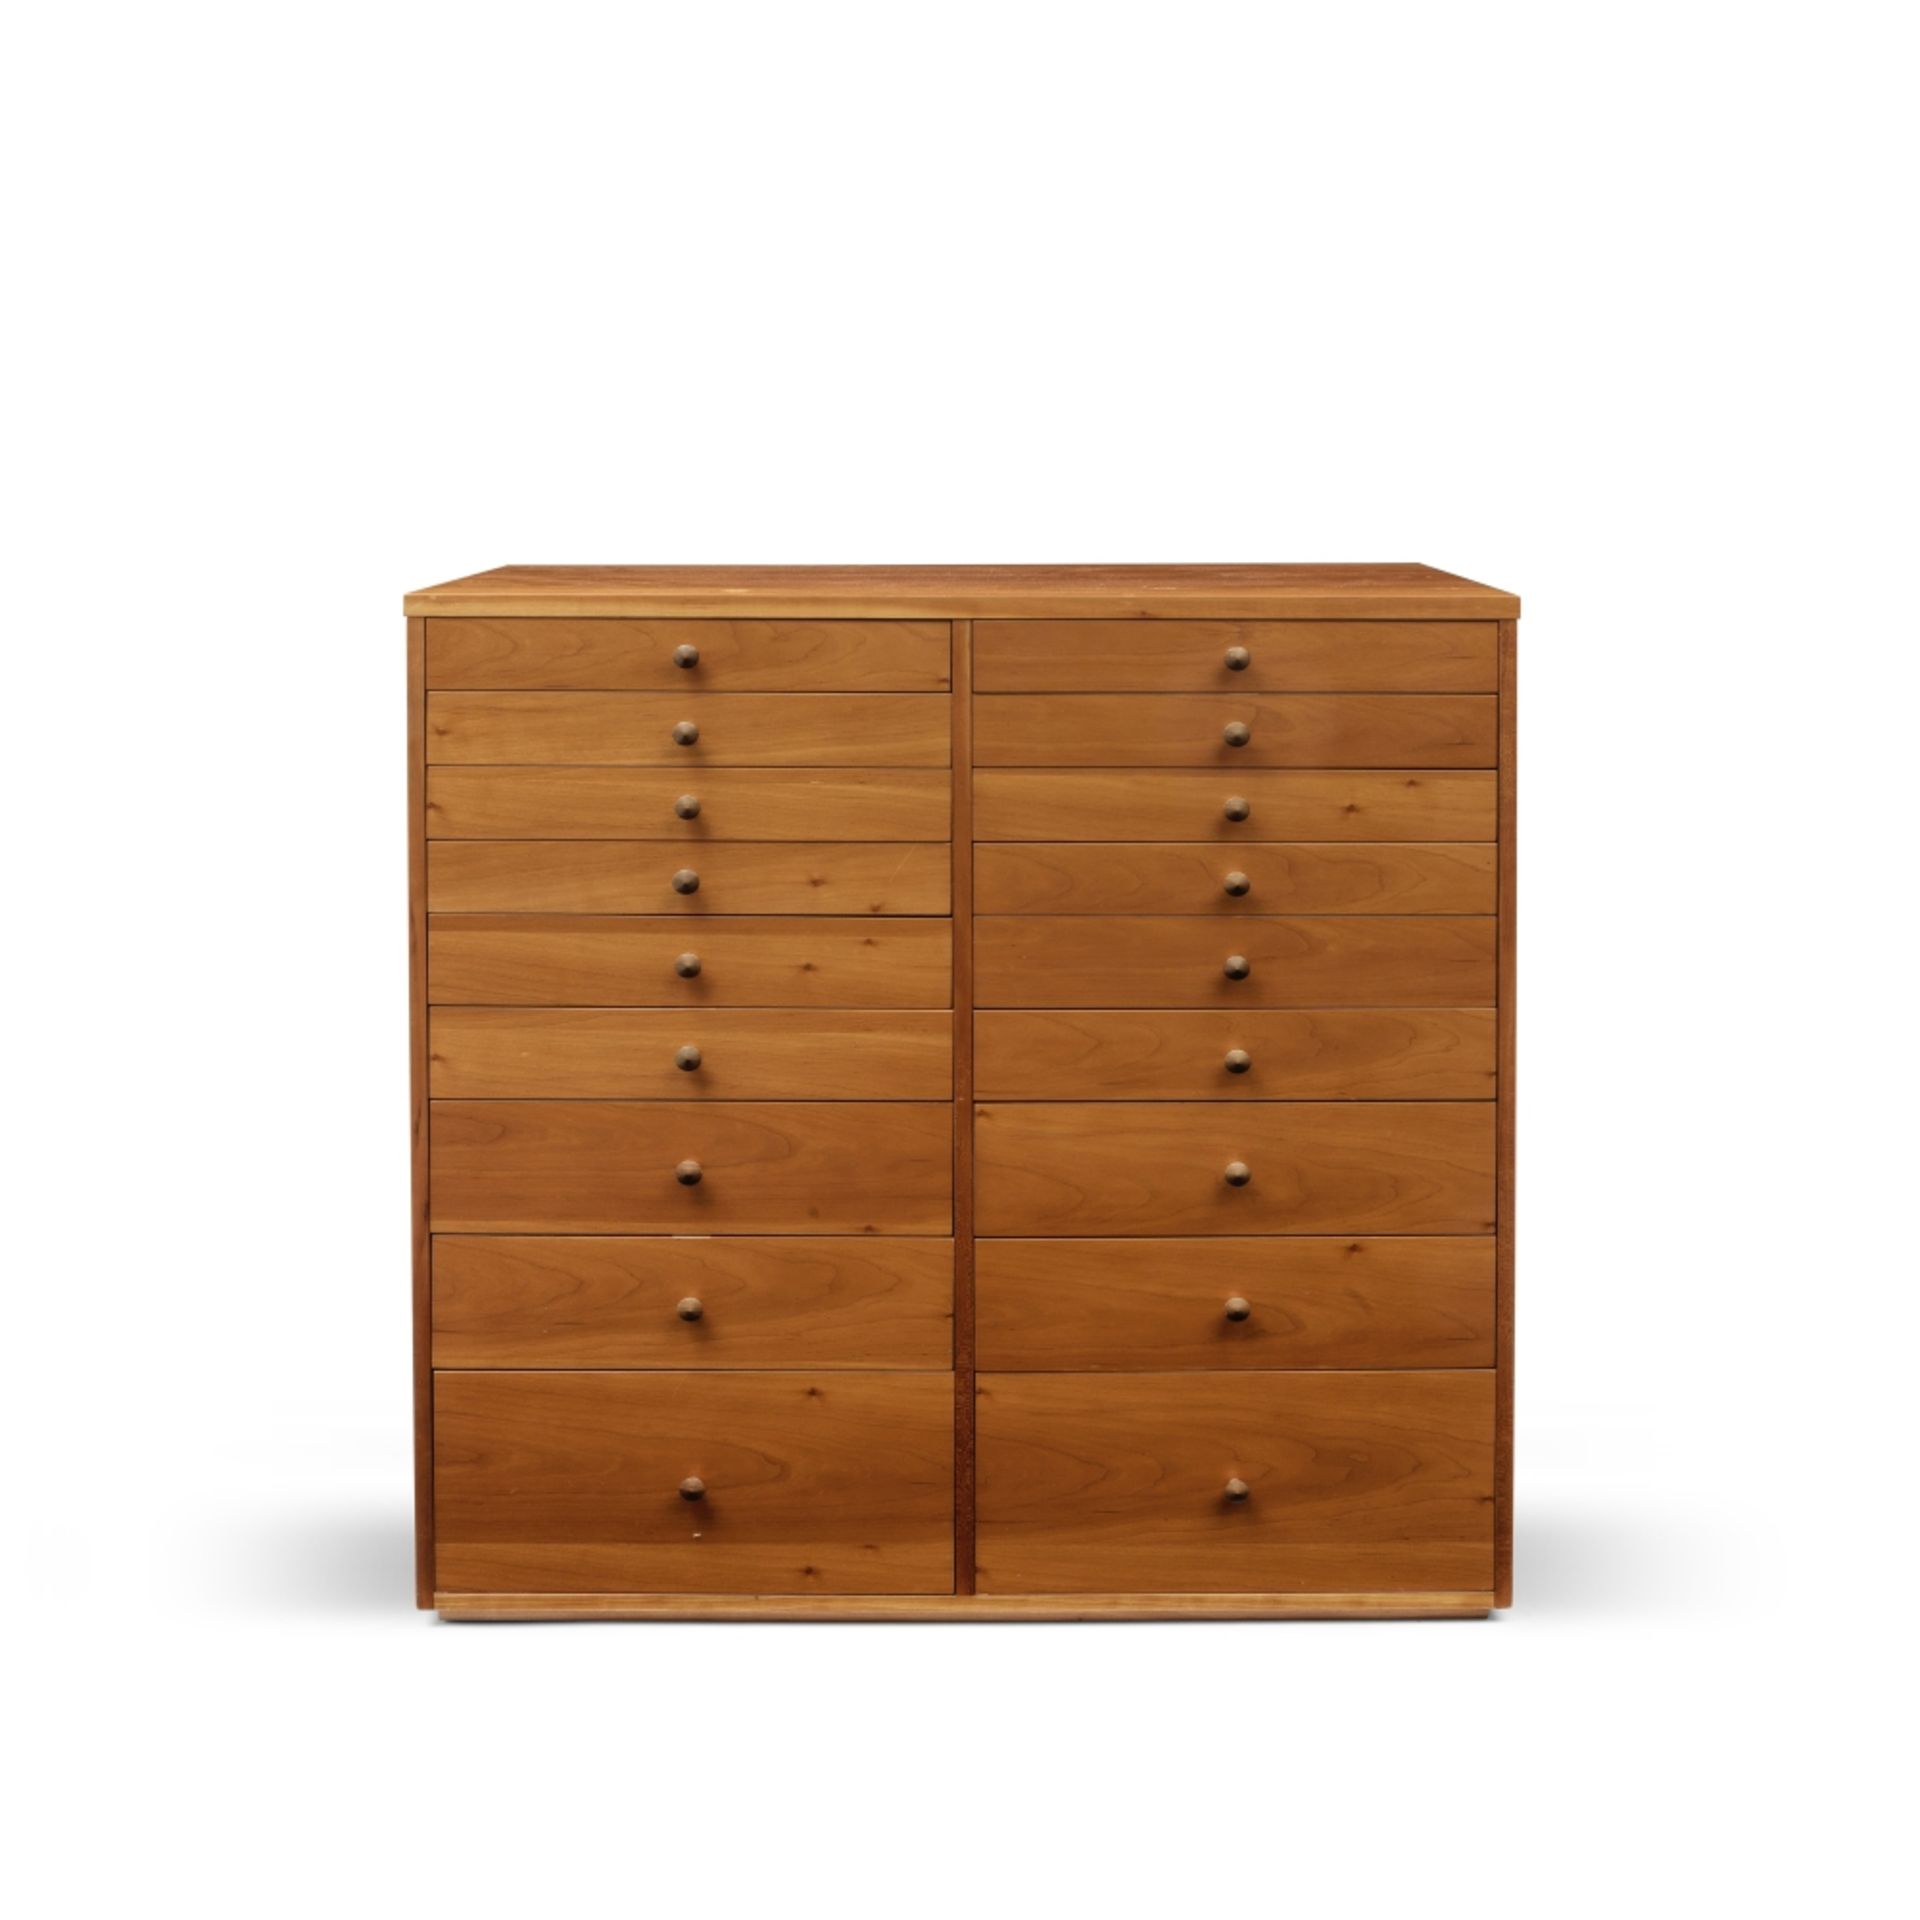 A cherrywood collector's or plan chestExclusively designed by Sir Terence Conran for Lady Conran,...